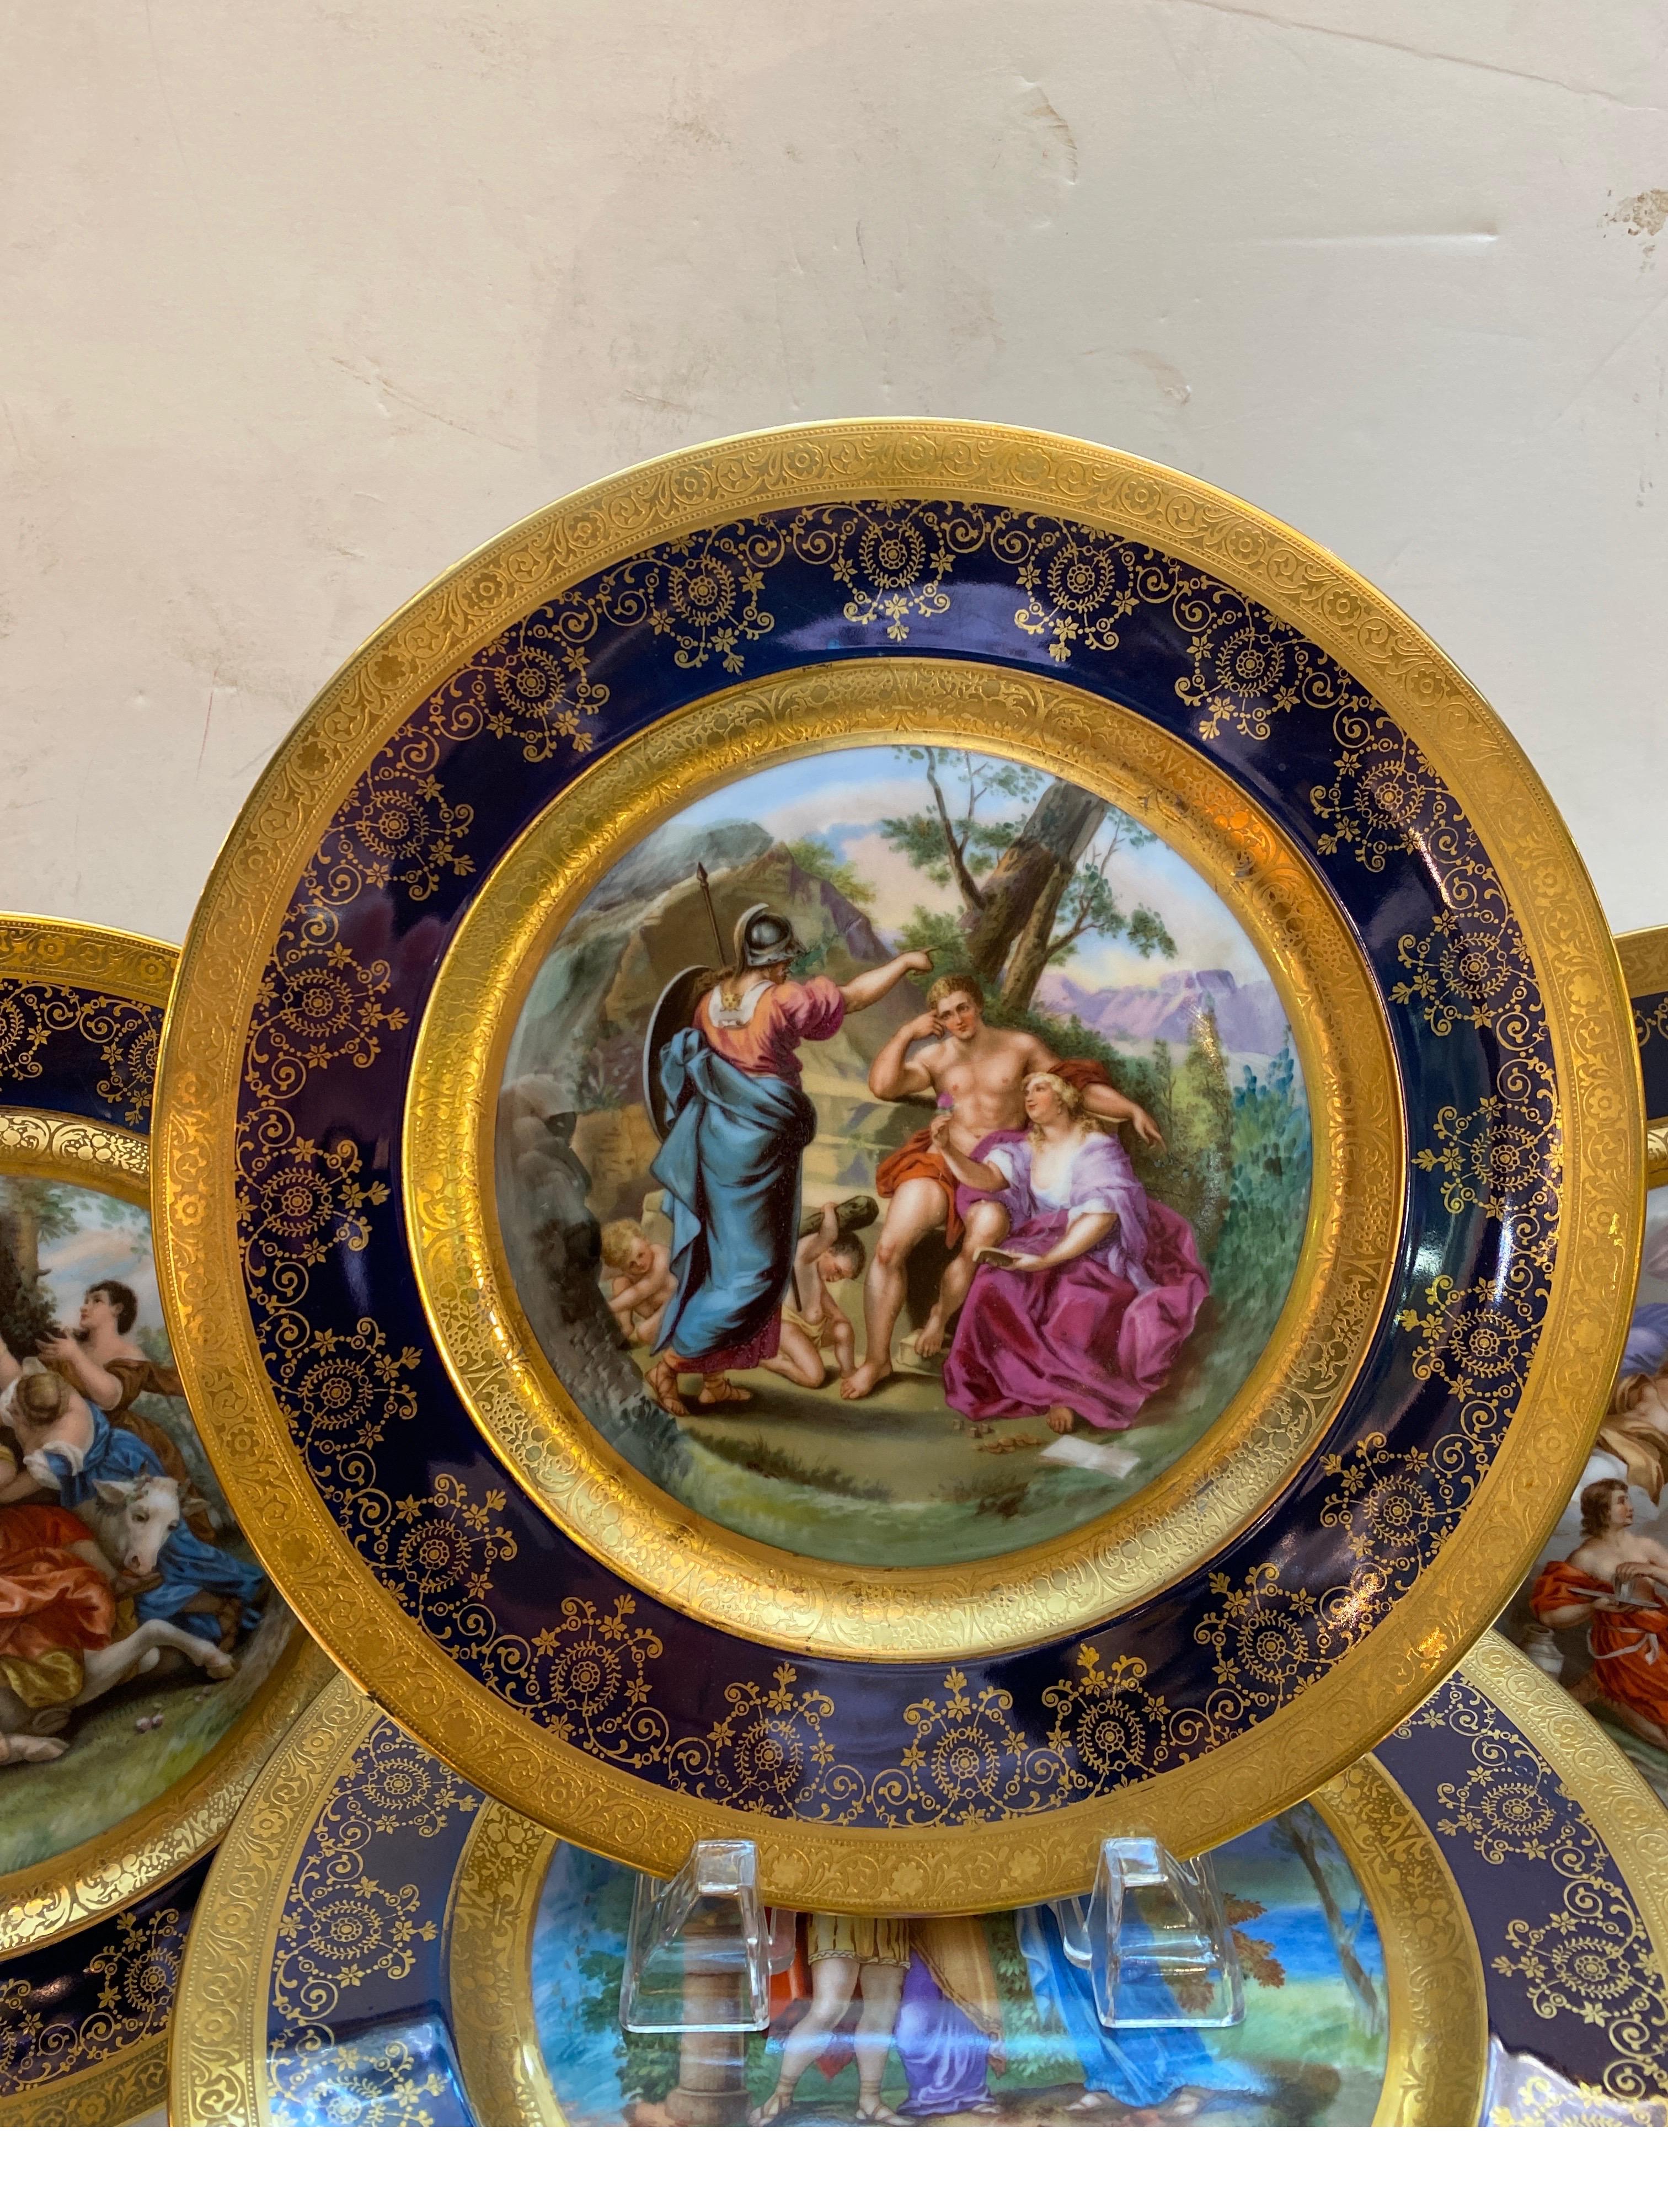 An elaborate set of 12 Royal Vienna porcelain hand painted cabinet plates with cobalt and gold borders. The plates measure 10.75 inches in diameter and depict 12 different allegorical scenes in vibrant colors. No breaks or repairs with minimal to no